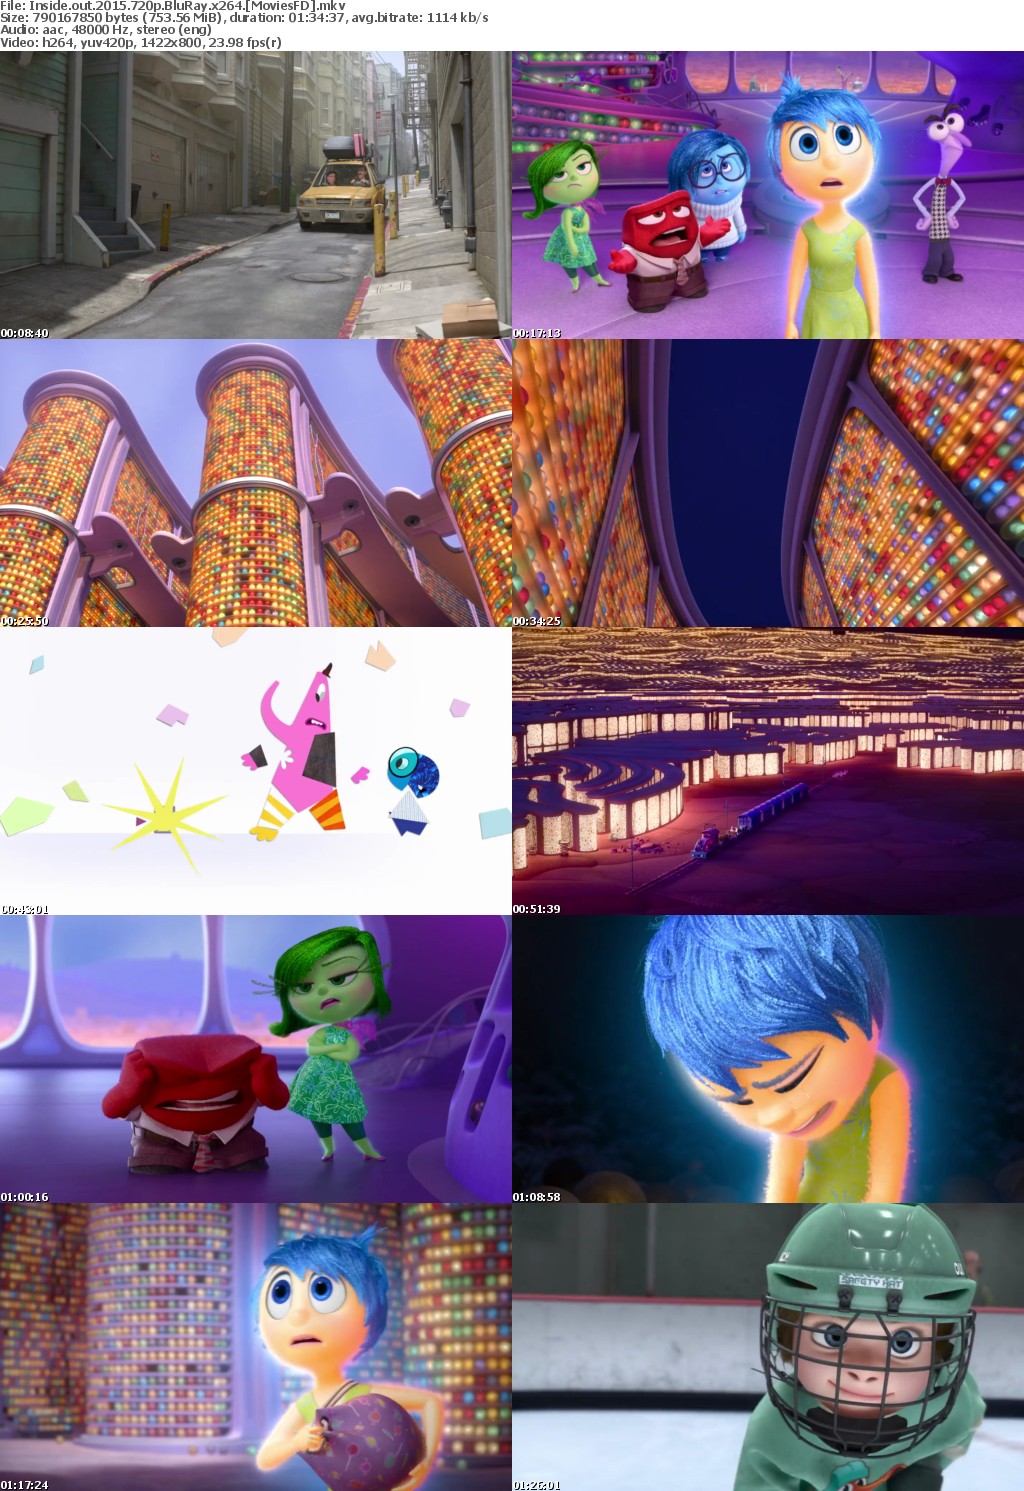 Inside Out (2015) 720p BluRay x264 - Moviesfd